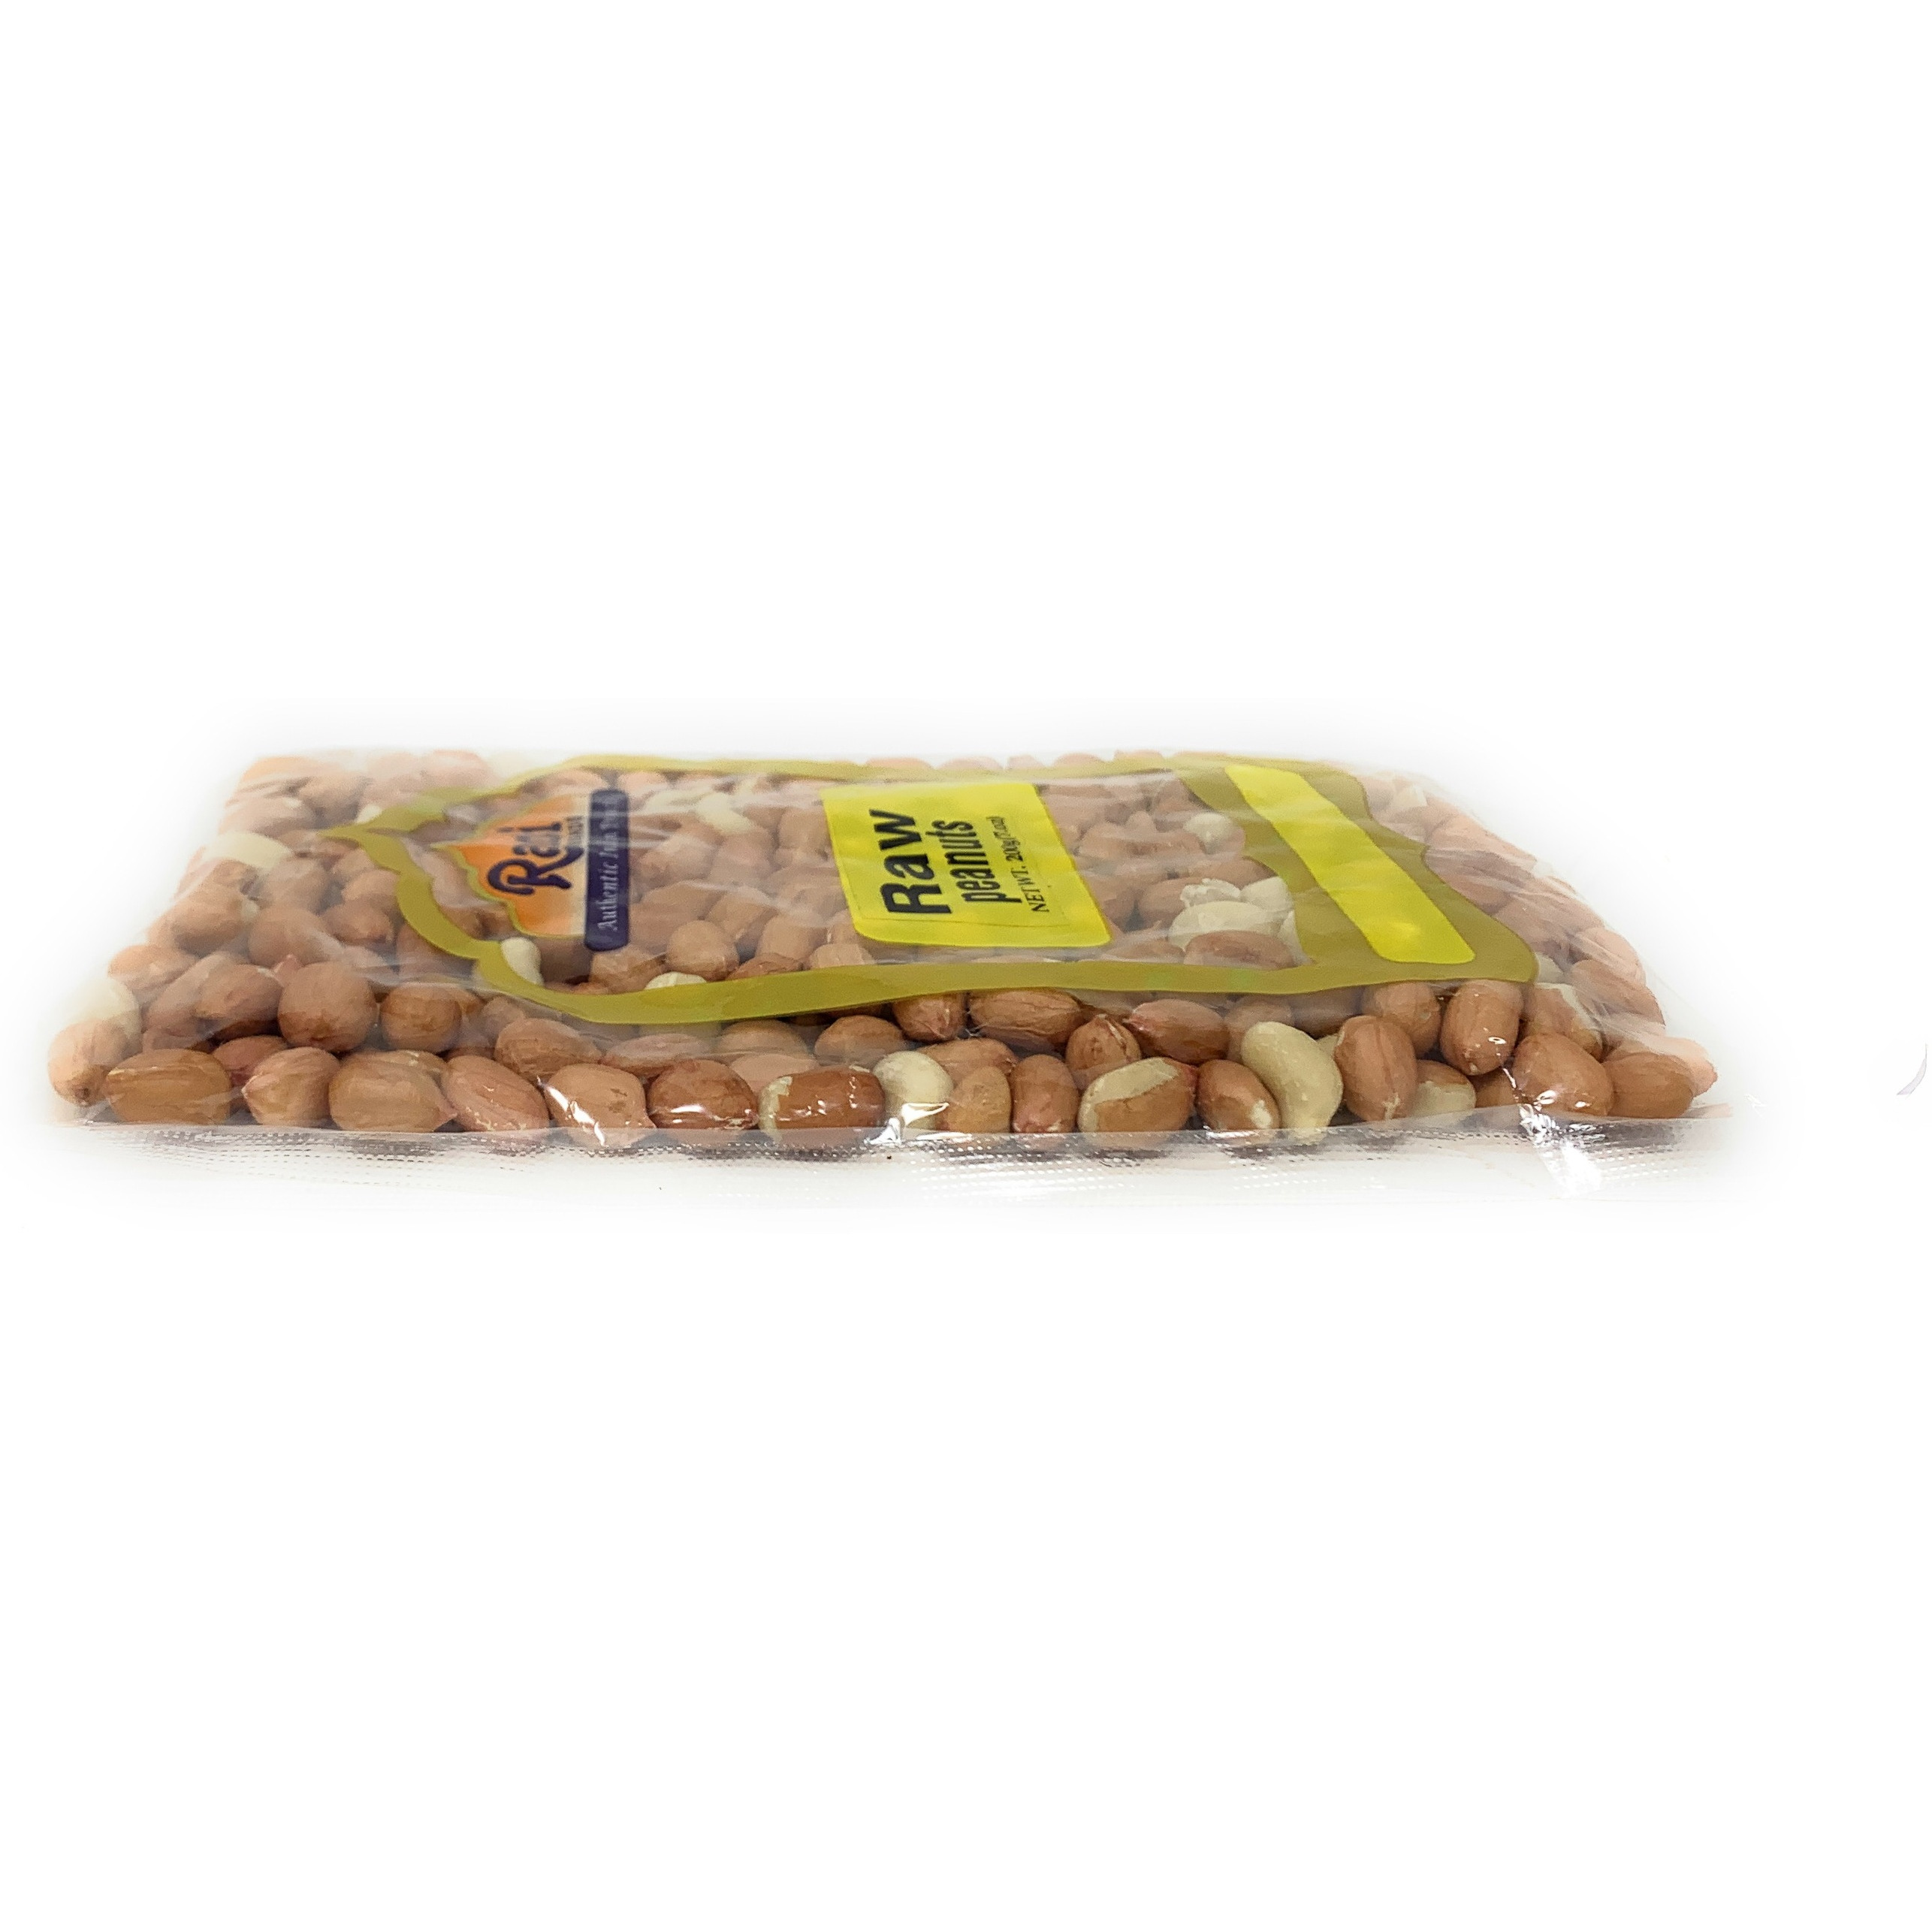 Rani Peanuts, Raw Whole With Skin (uncooked, unsalted) 7oz (200g) ~ All Natural | Vegan | Gluten Friendly | Fresh Product of USA ~ Spanish Grade Groundnut / Redskin